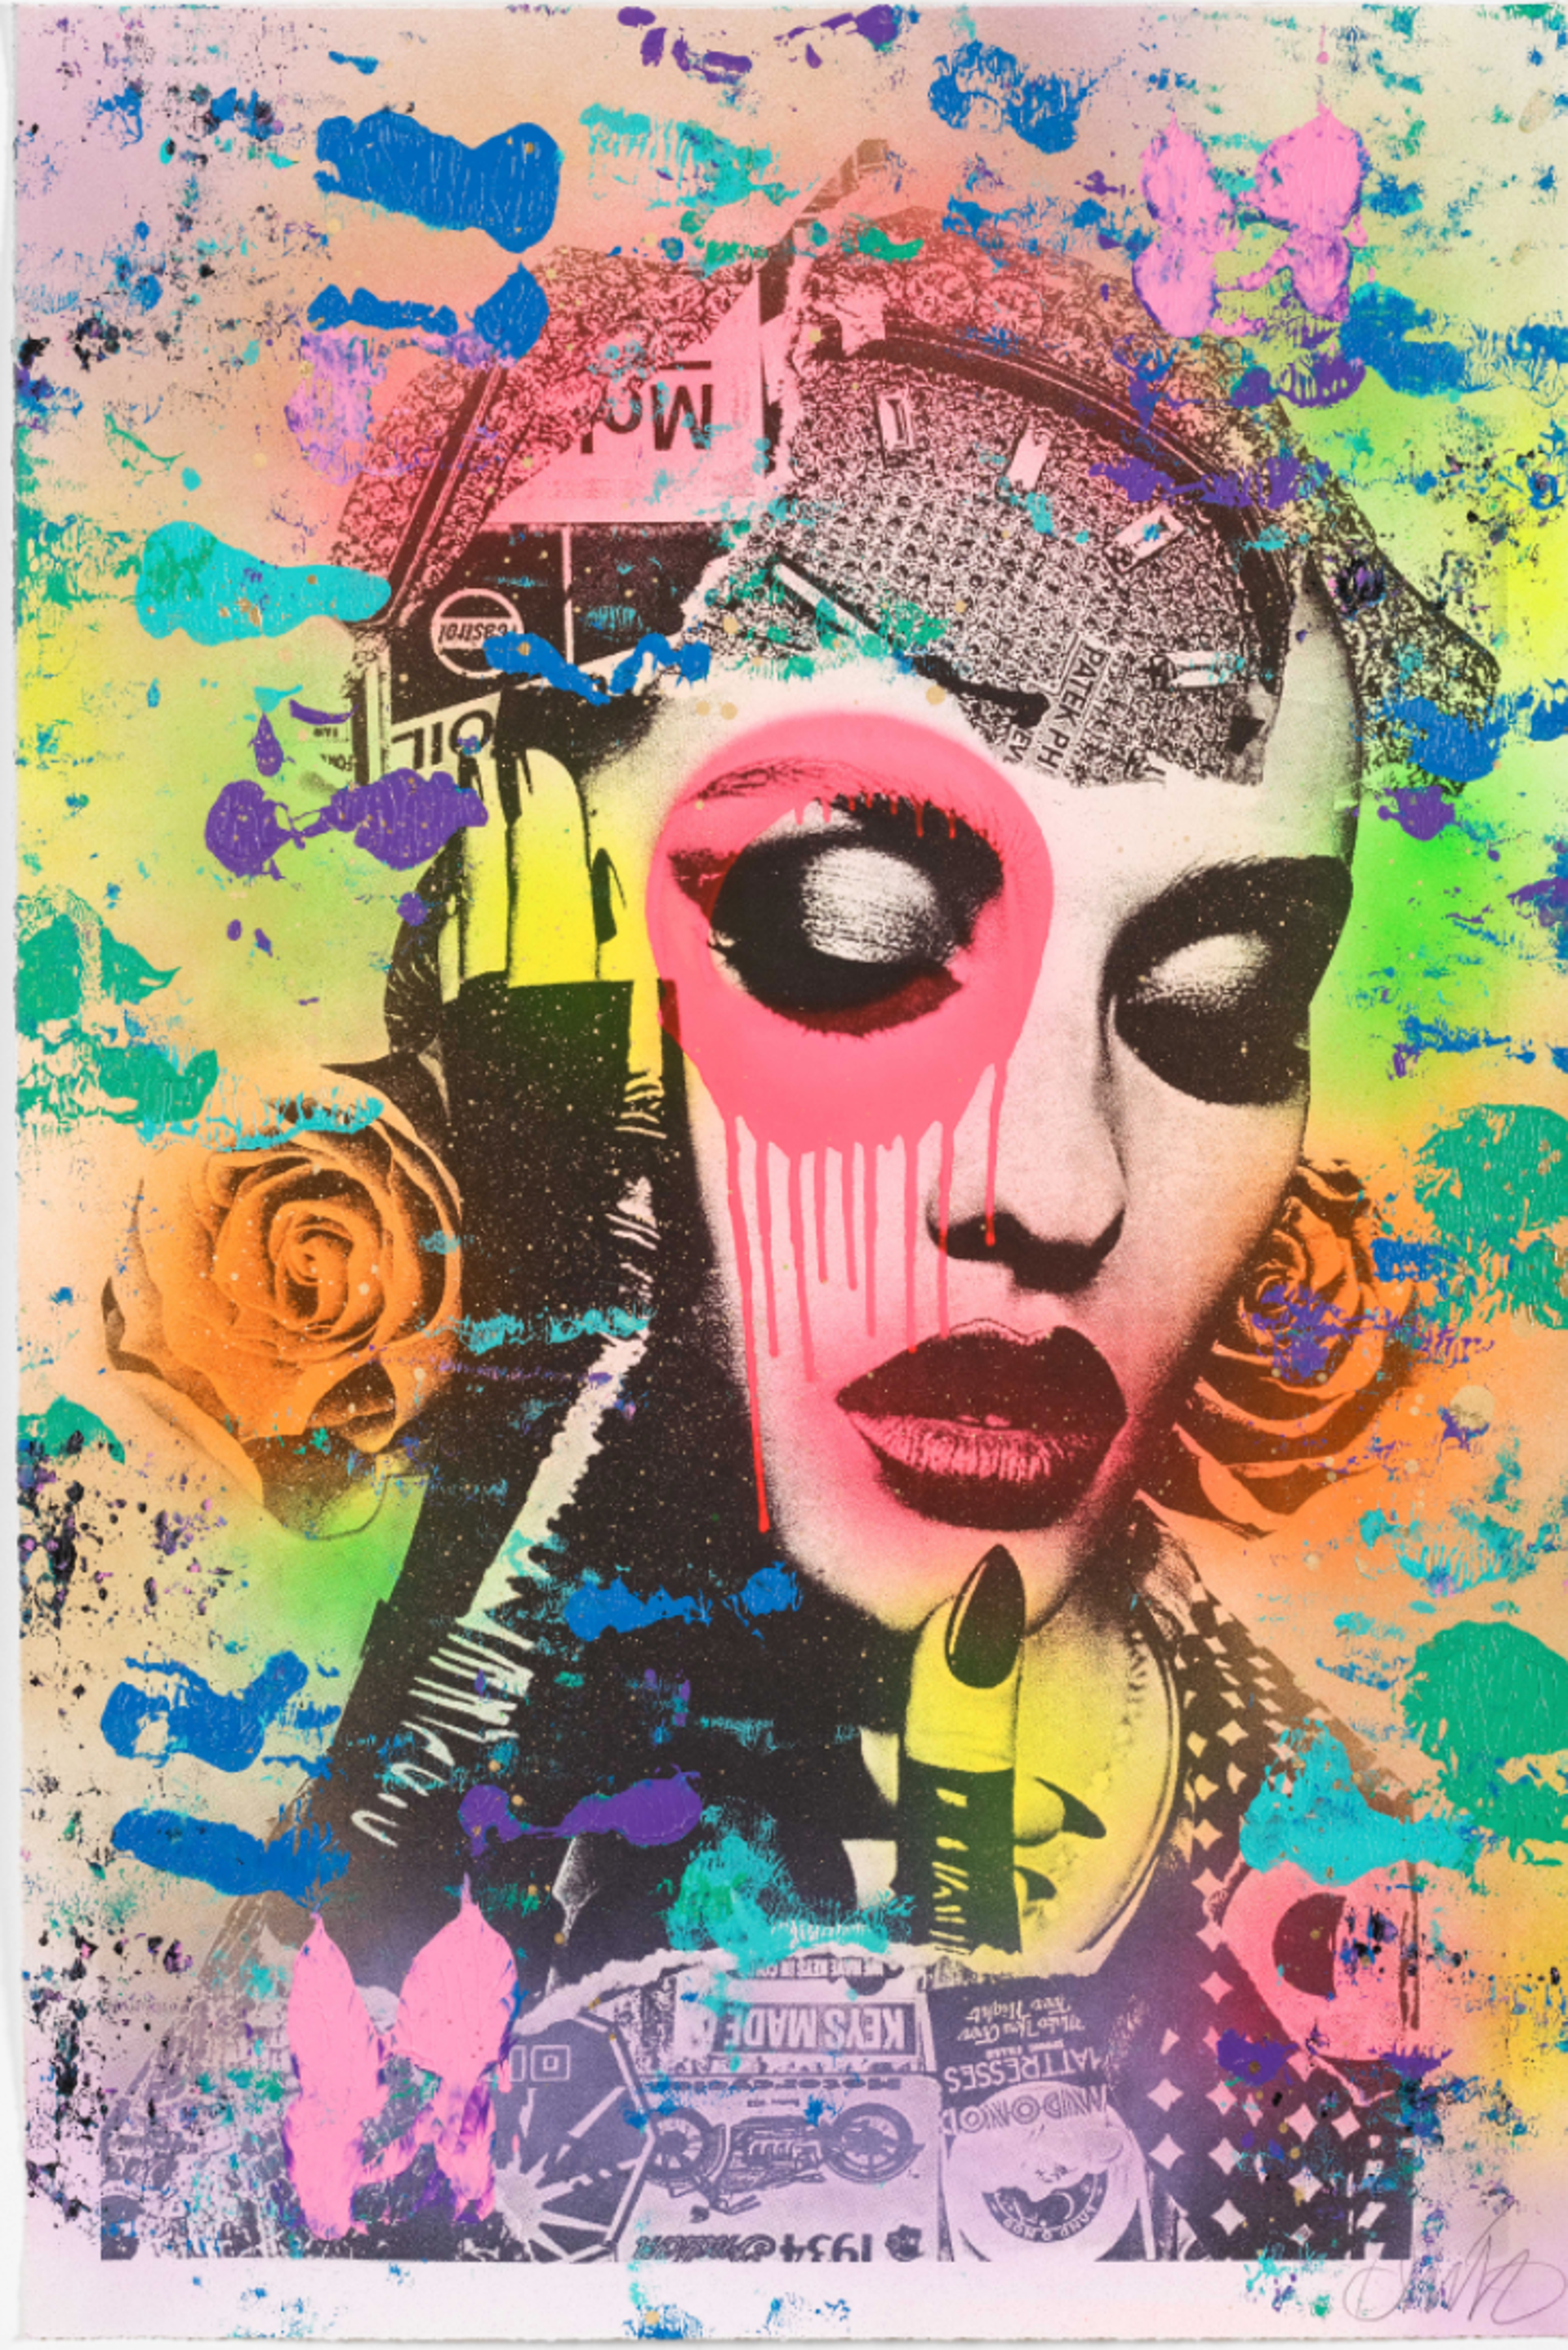 Untitled 4 by DAIN